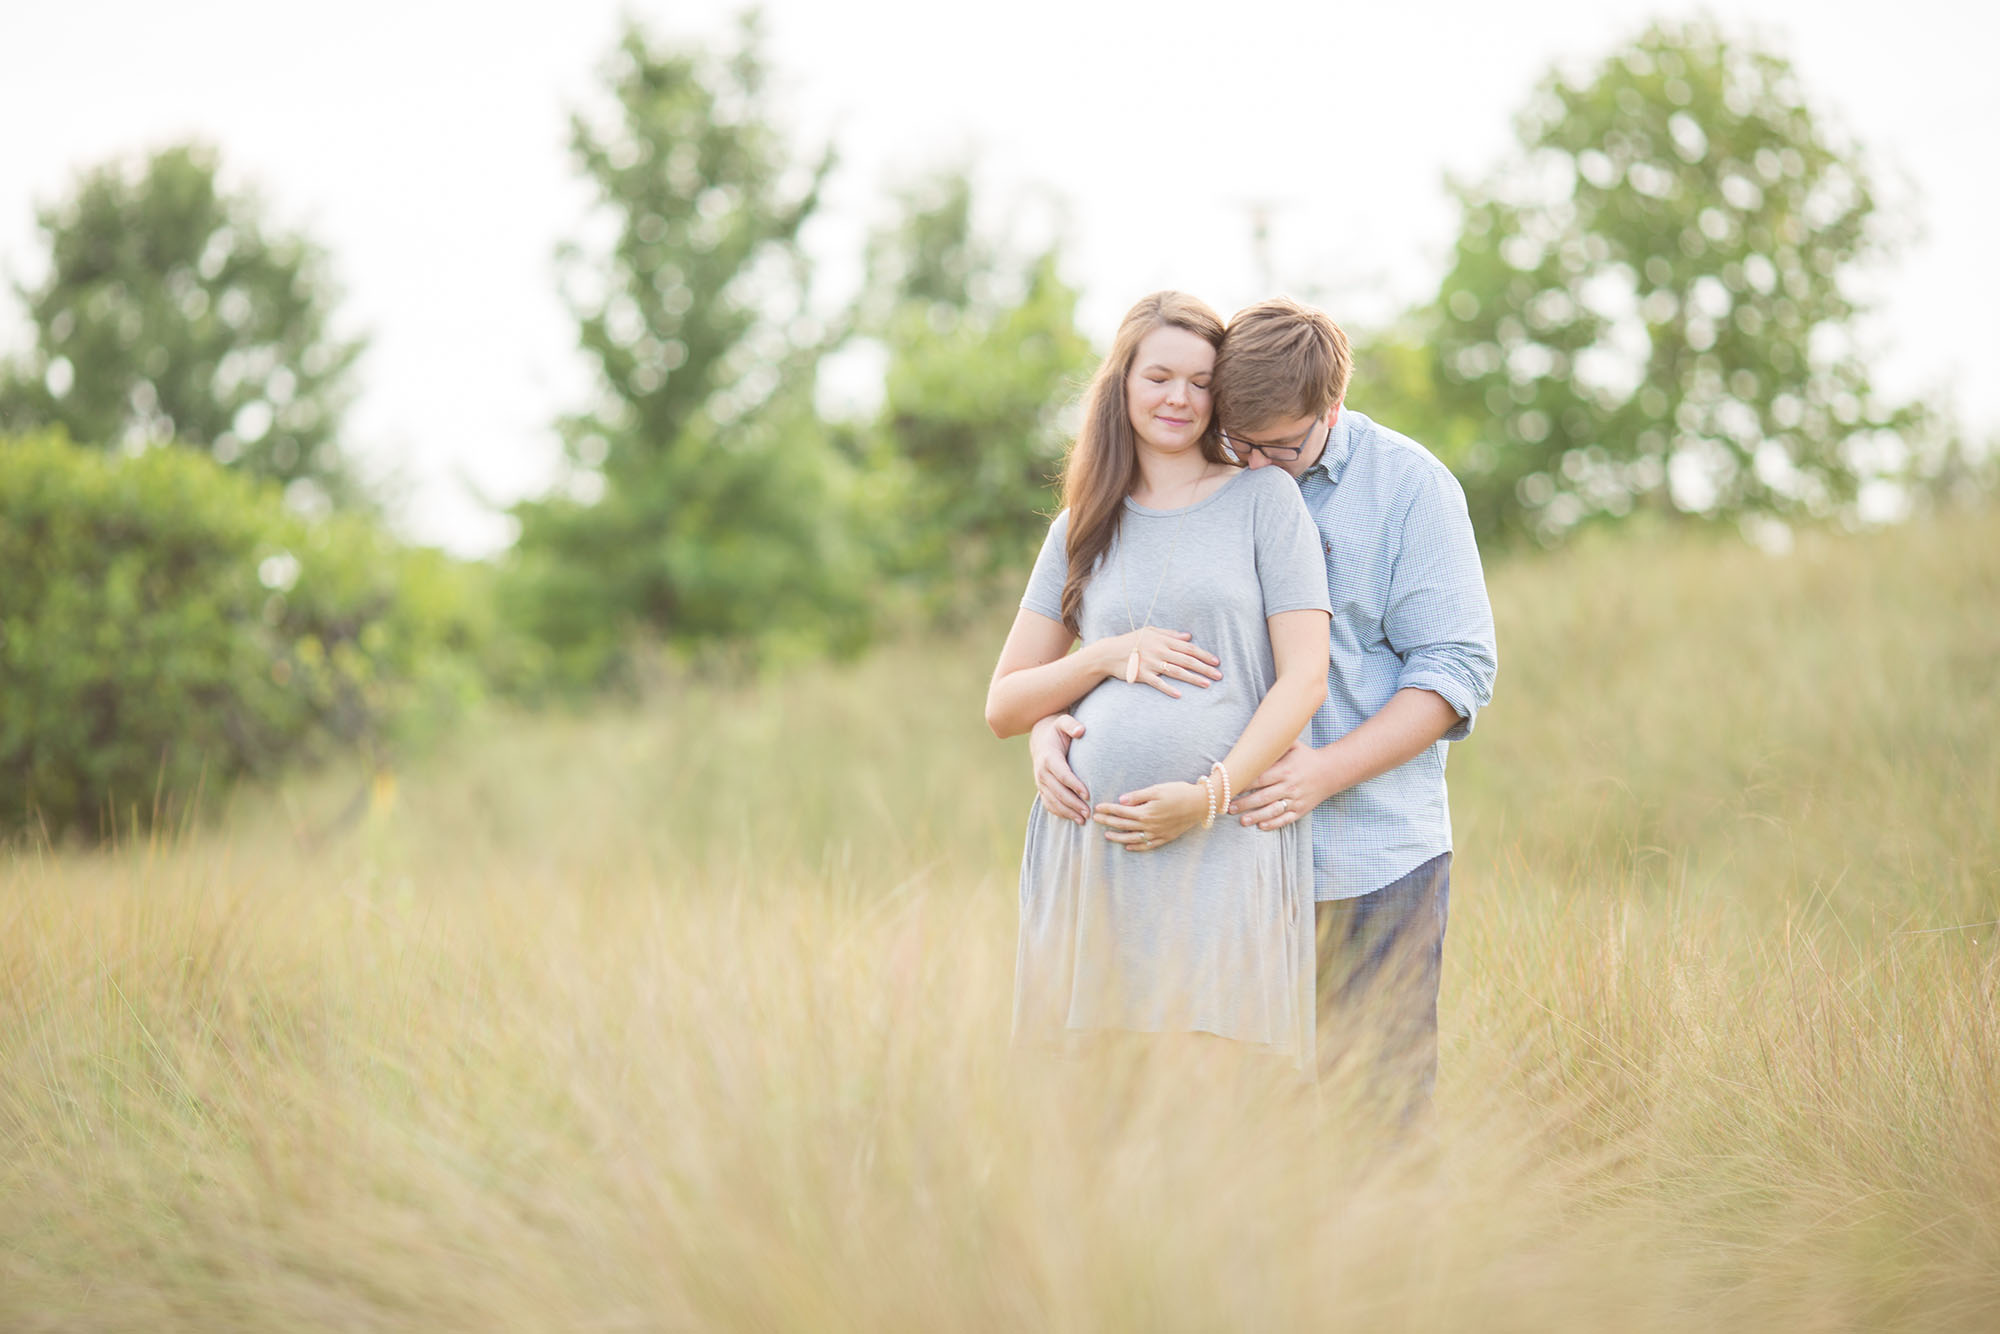 Kasey & Michelle's Maternity | Birmingham Alabama wedding photographers Katie and alec photography husband and wife team